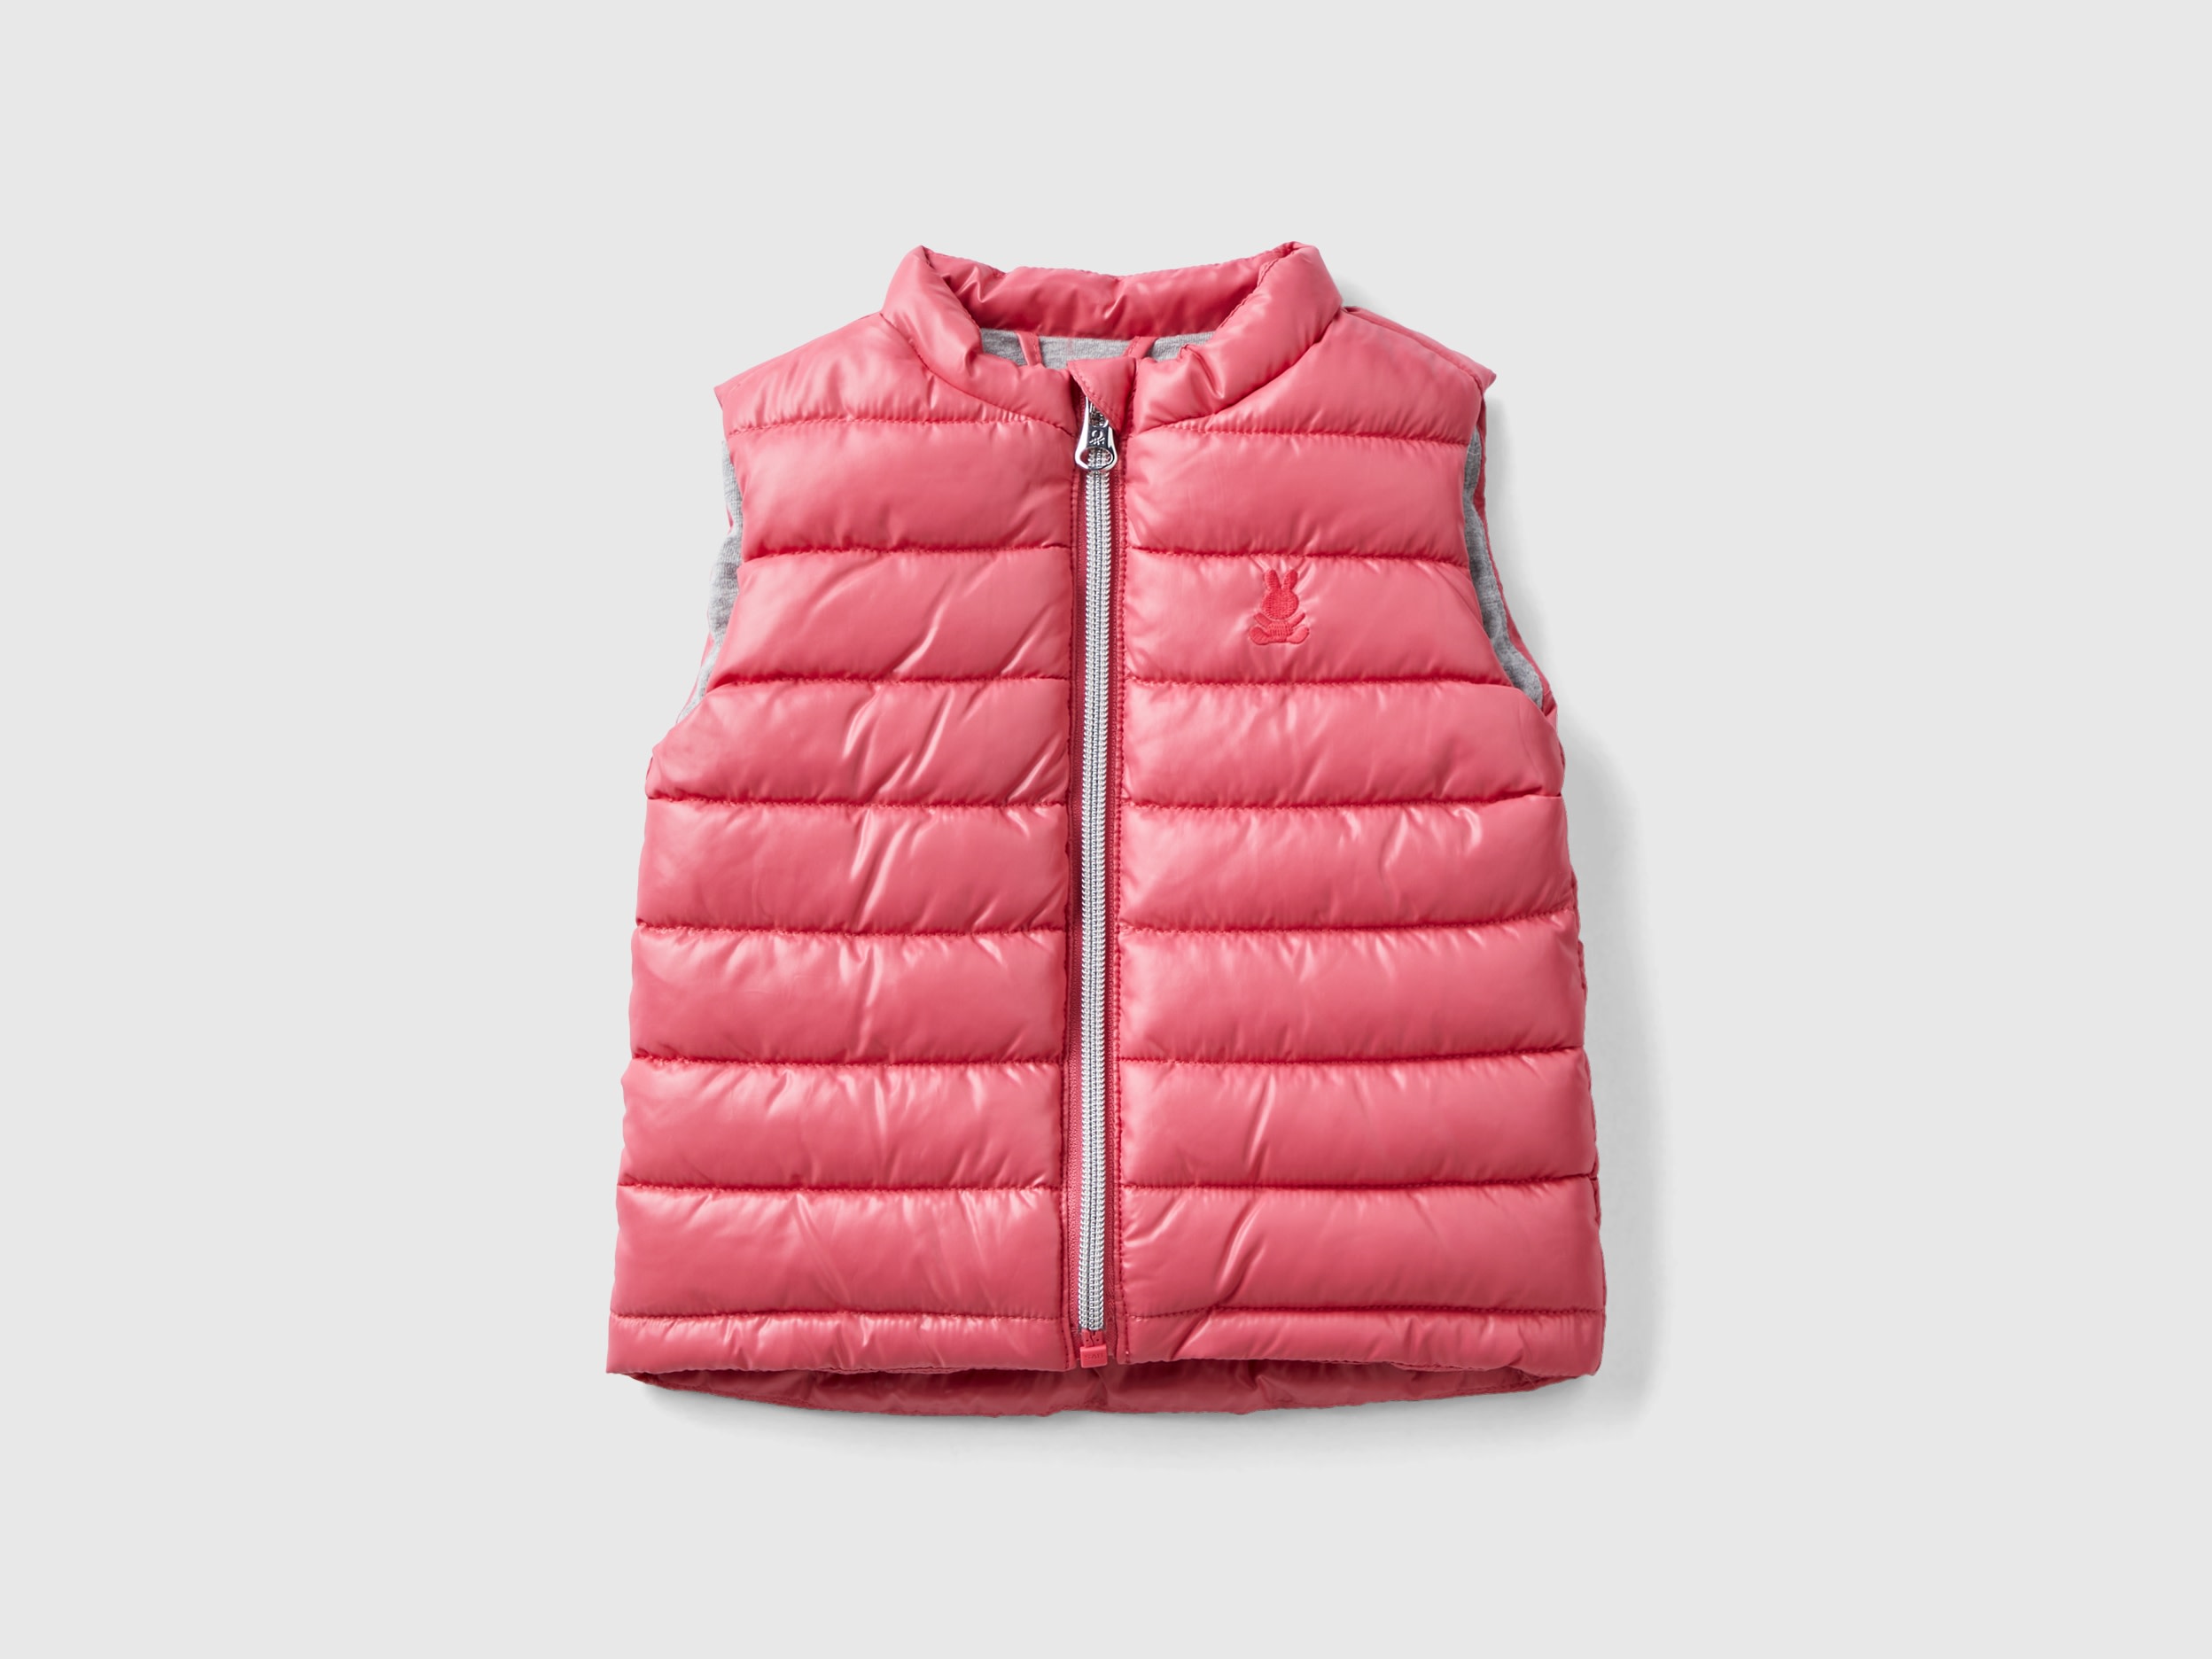 Benetton, Padded Vest In Technical Fabric, size 9-12, Salmon, Kids